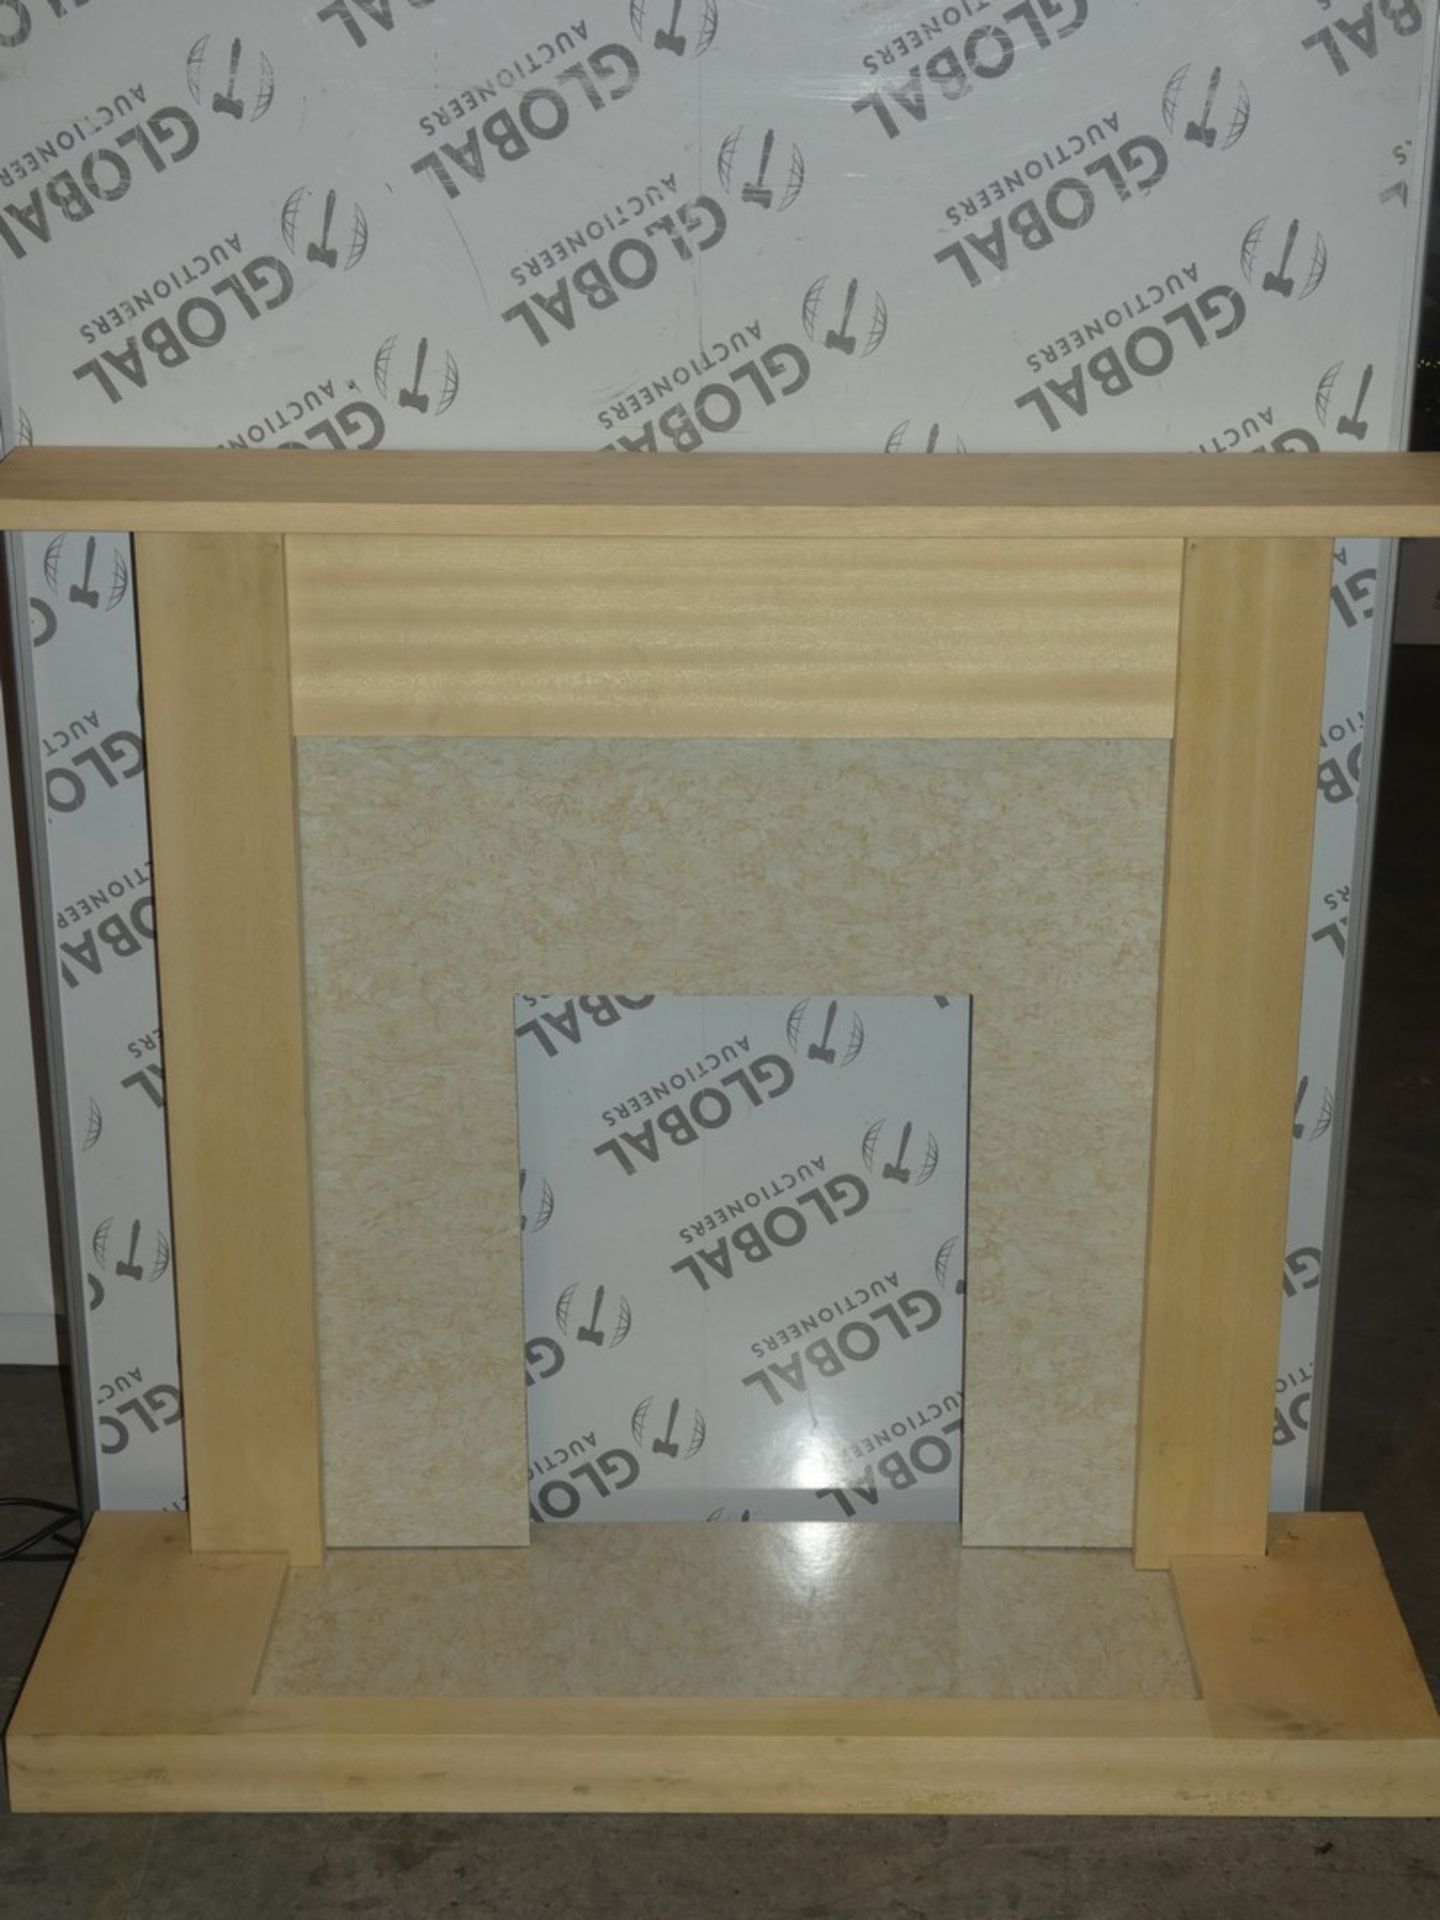 Boxed Houston Fire Surround Reversible Back, Black or Cream RRP £229